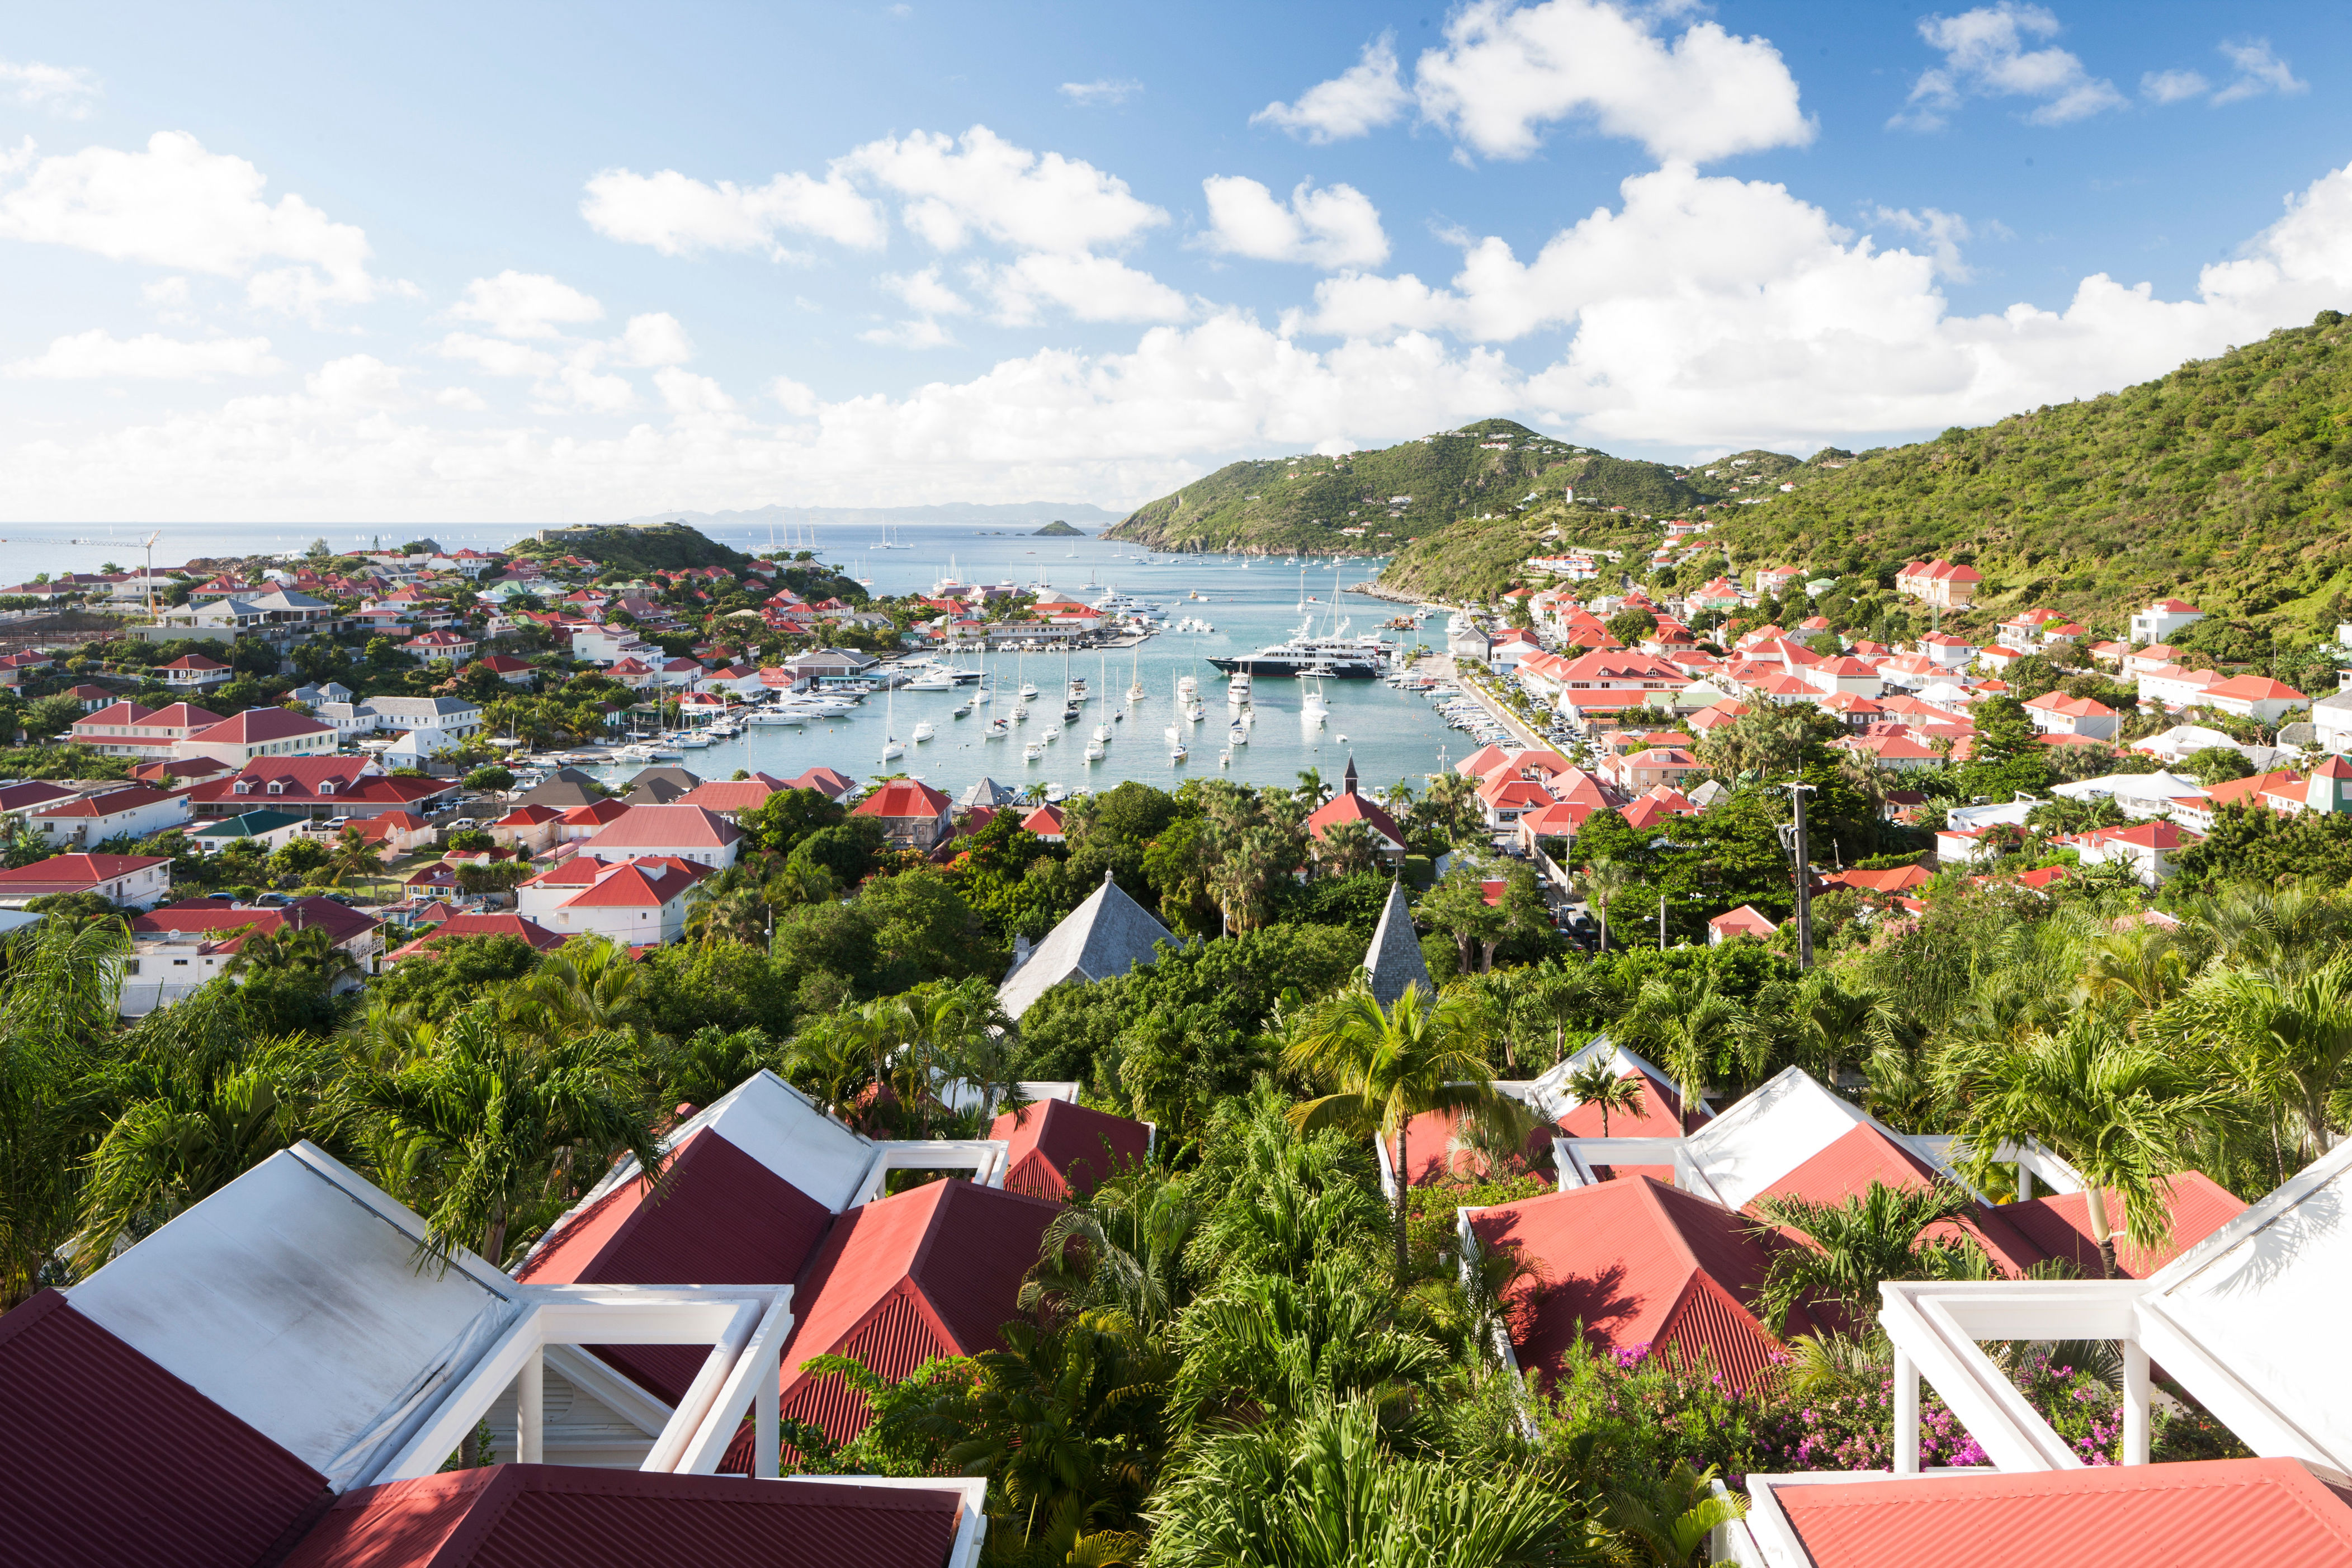 <p>This tony territory has enough scenic views and water sports to give all of its <a href="https://www.cntraveler.com/readers-choice-awards/caribbean-atlantic/caribbean-top-resorts?mbid=synd_msn_rss&utm_source=msn&utm_medium=syndication">famed five-star hotels</a> a run for their money. On the south coast of the island, Anse de Grande Saline treats visitors to vegetated sand dunes and unobstructed views of turquoise waters.</p> <p>For a more accessible beach experience, head directly to St. Jean, a coastal town that would feel at home along the French Riviera. The calm and clear waters are ideal for surfing, with plenty of boutiques to visit if you ever need a break from the sun.</p><p>Sign up to receive the latest news, expert tips, and inspiration on all things travel</p><a href="https://www.cntraveler.com/newsletter/the-daily?sourceCode=msnsend">Inspire Me</a>